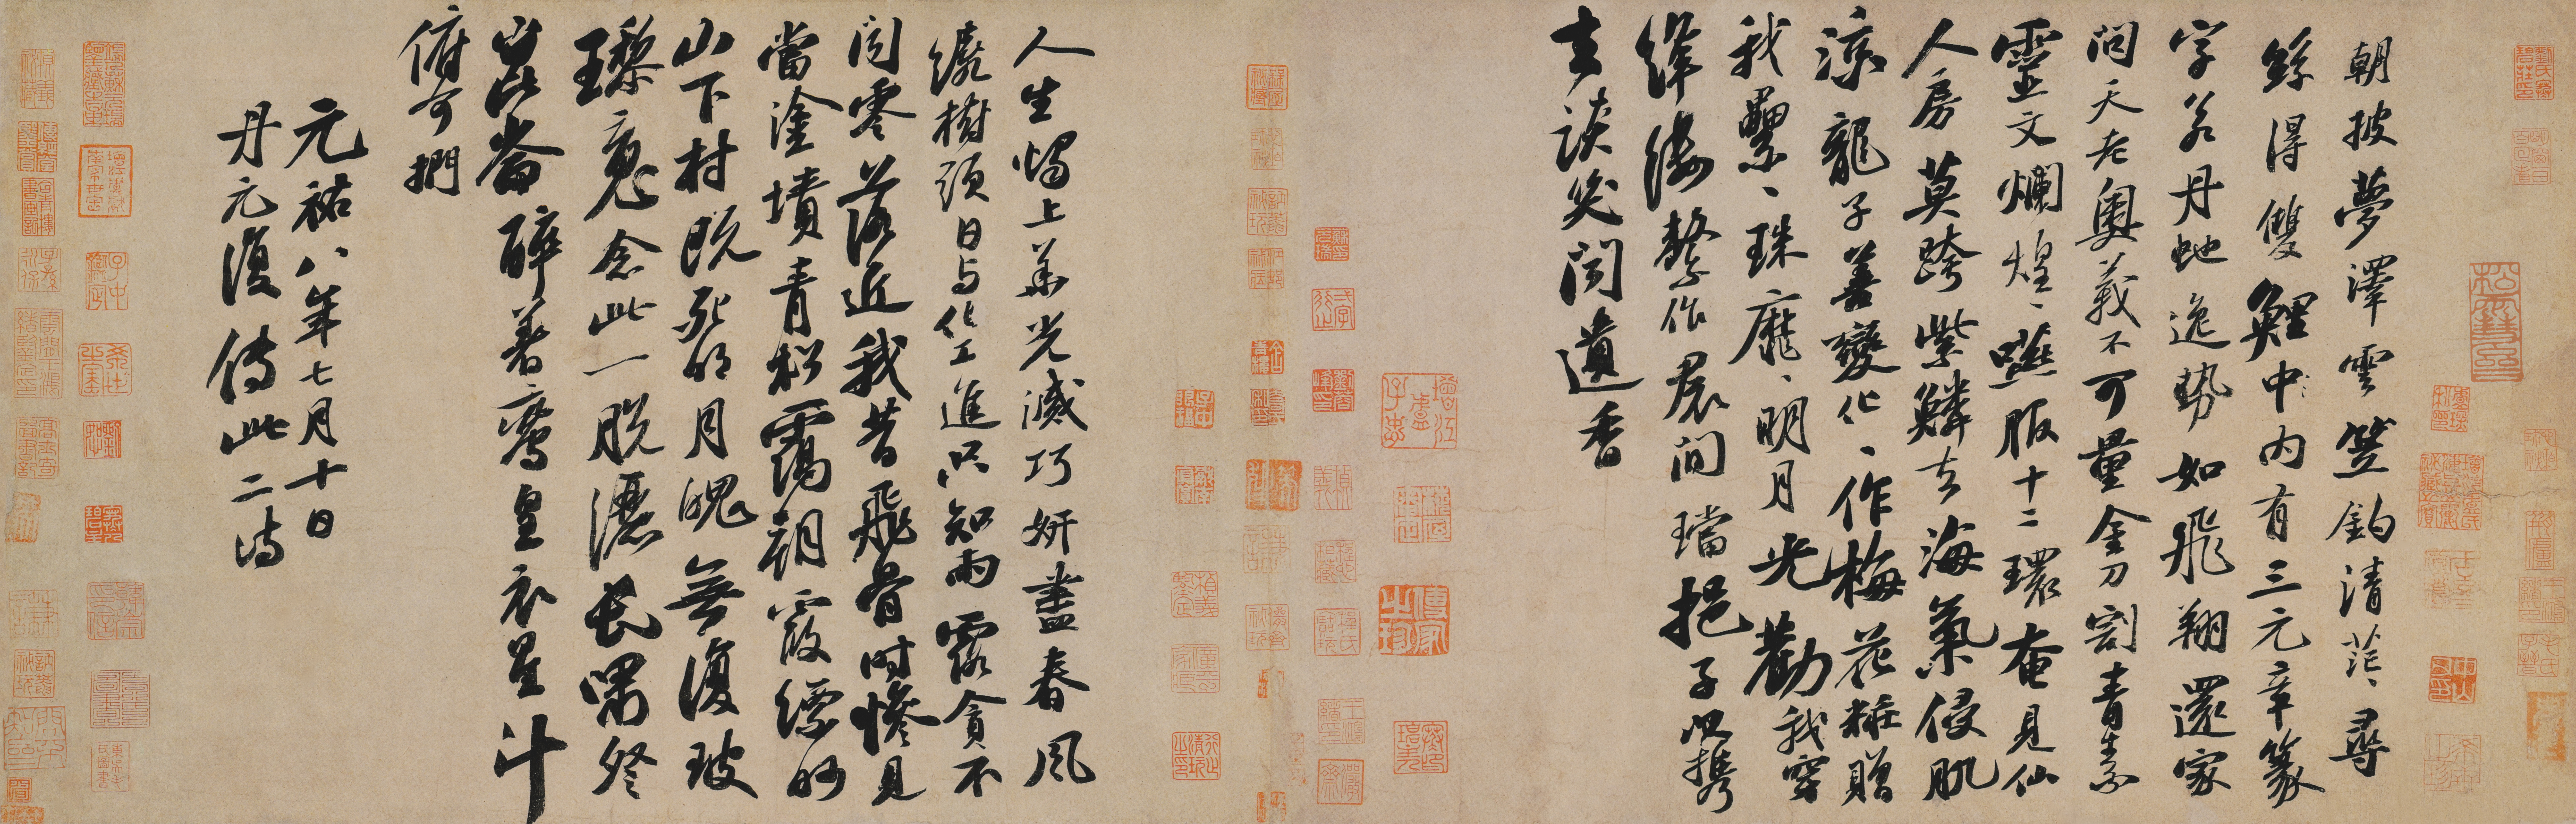 Chinese Characters Poem Text Su Shi 10611x3396